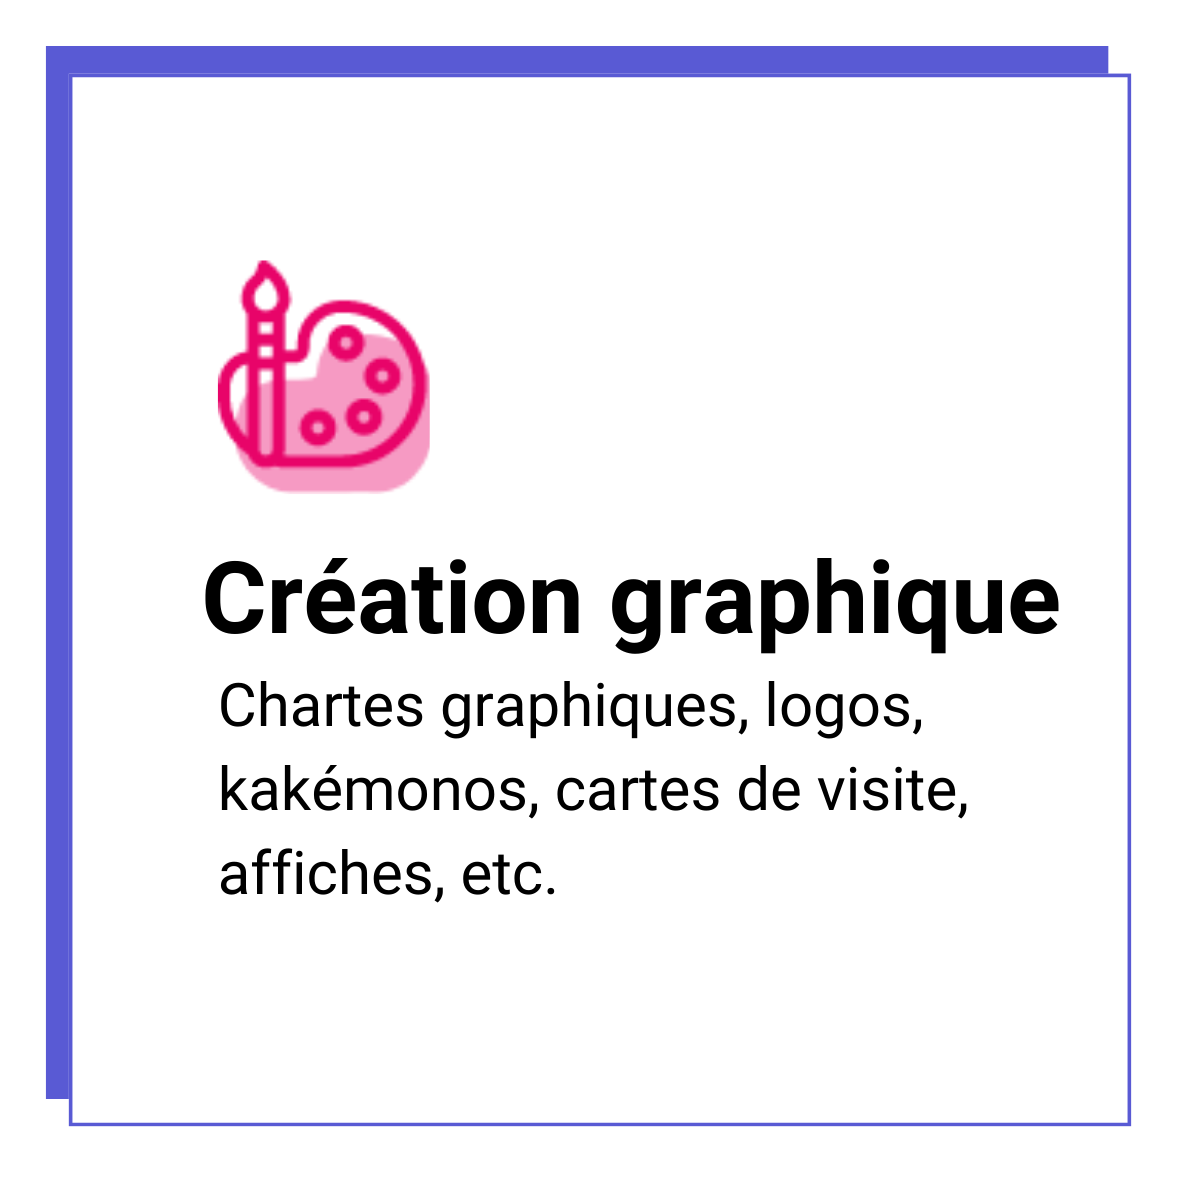 Useweb_expertise_création-graphique